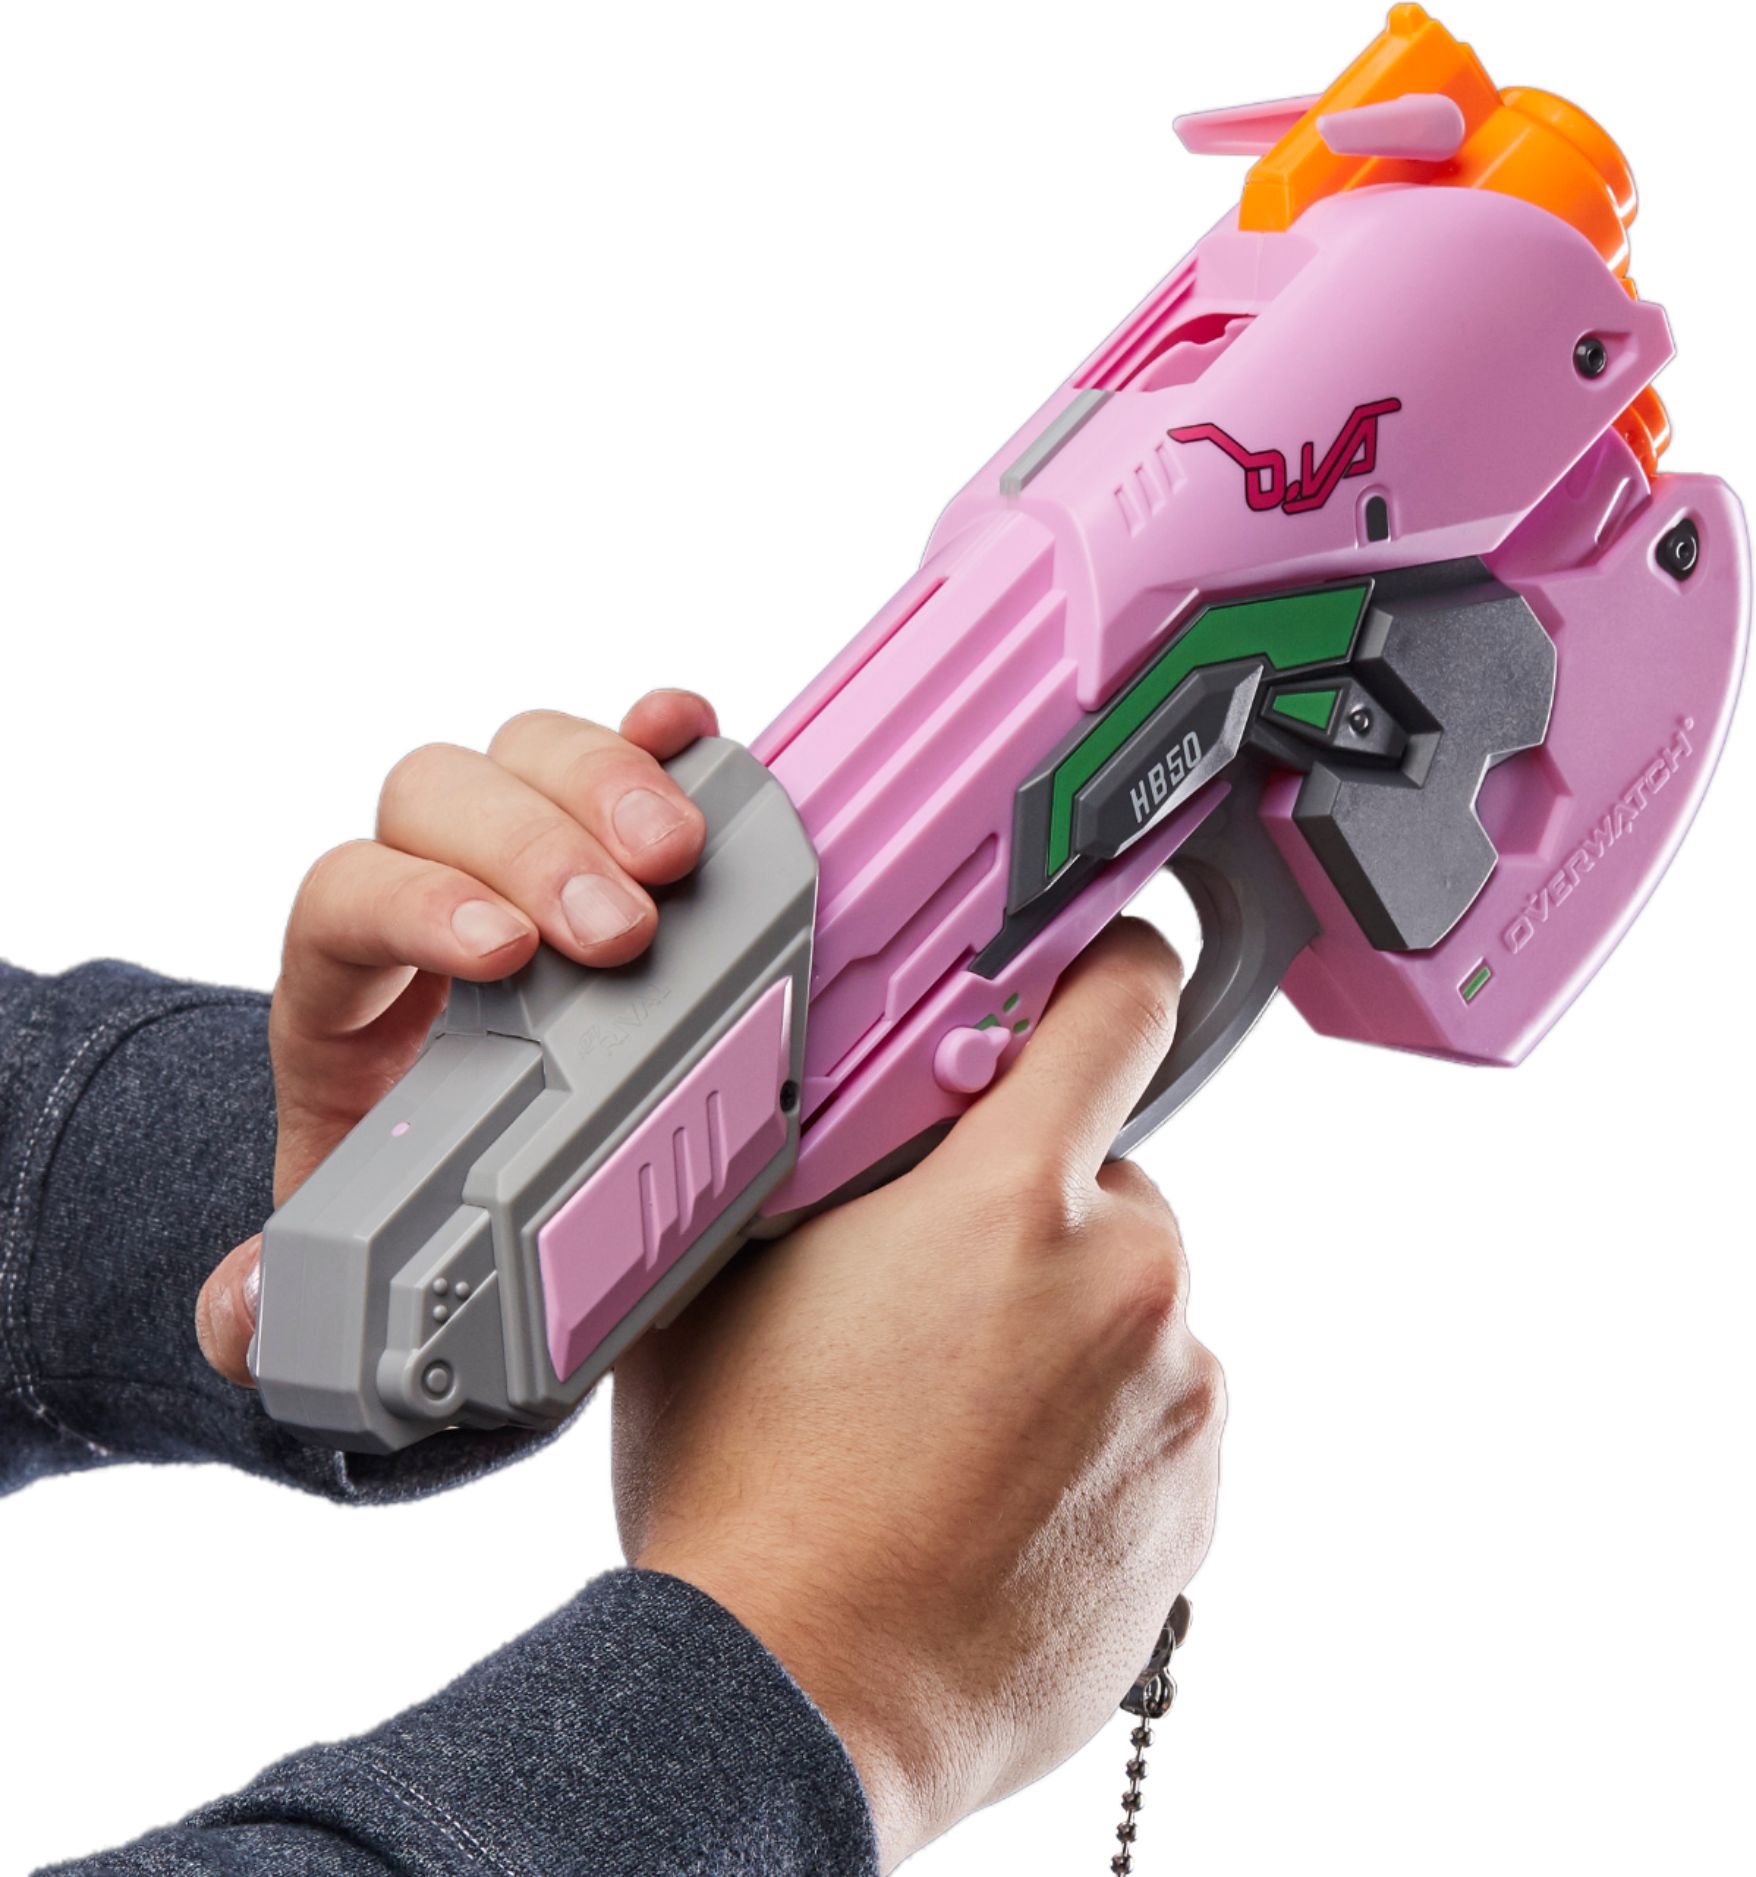 NERF Rival Overwatch D.VA Blaster 3 Overwatch Rounds Ages 14 Toy Gun Fire Fight 